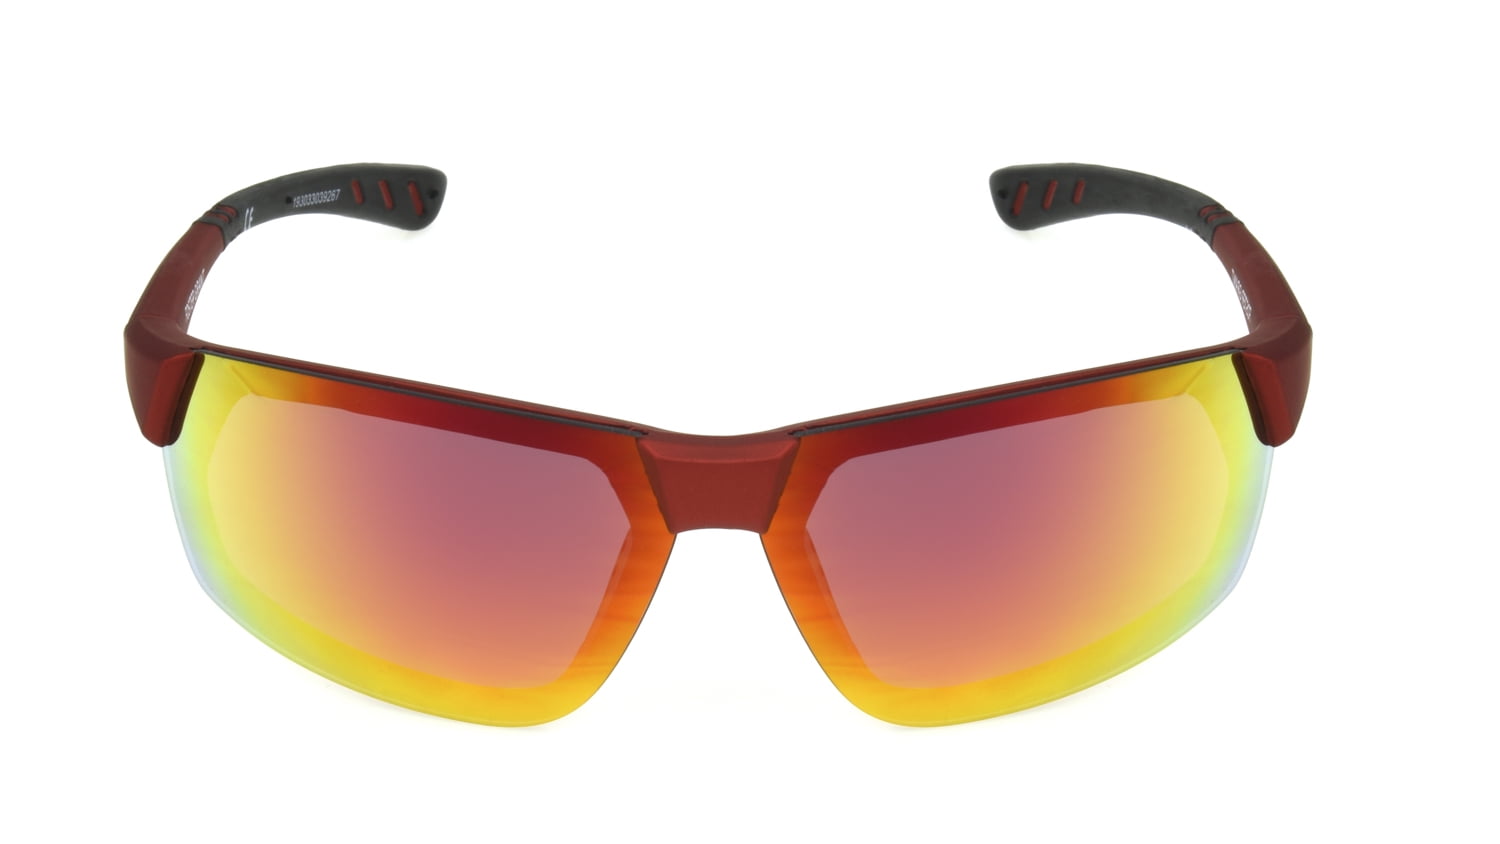 foster grant sunglasses Uv Protection New With Pouch And Tags Rrp £16 Men